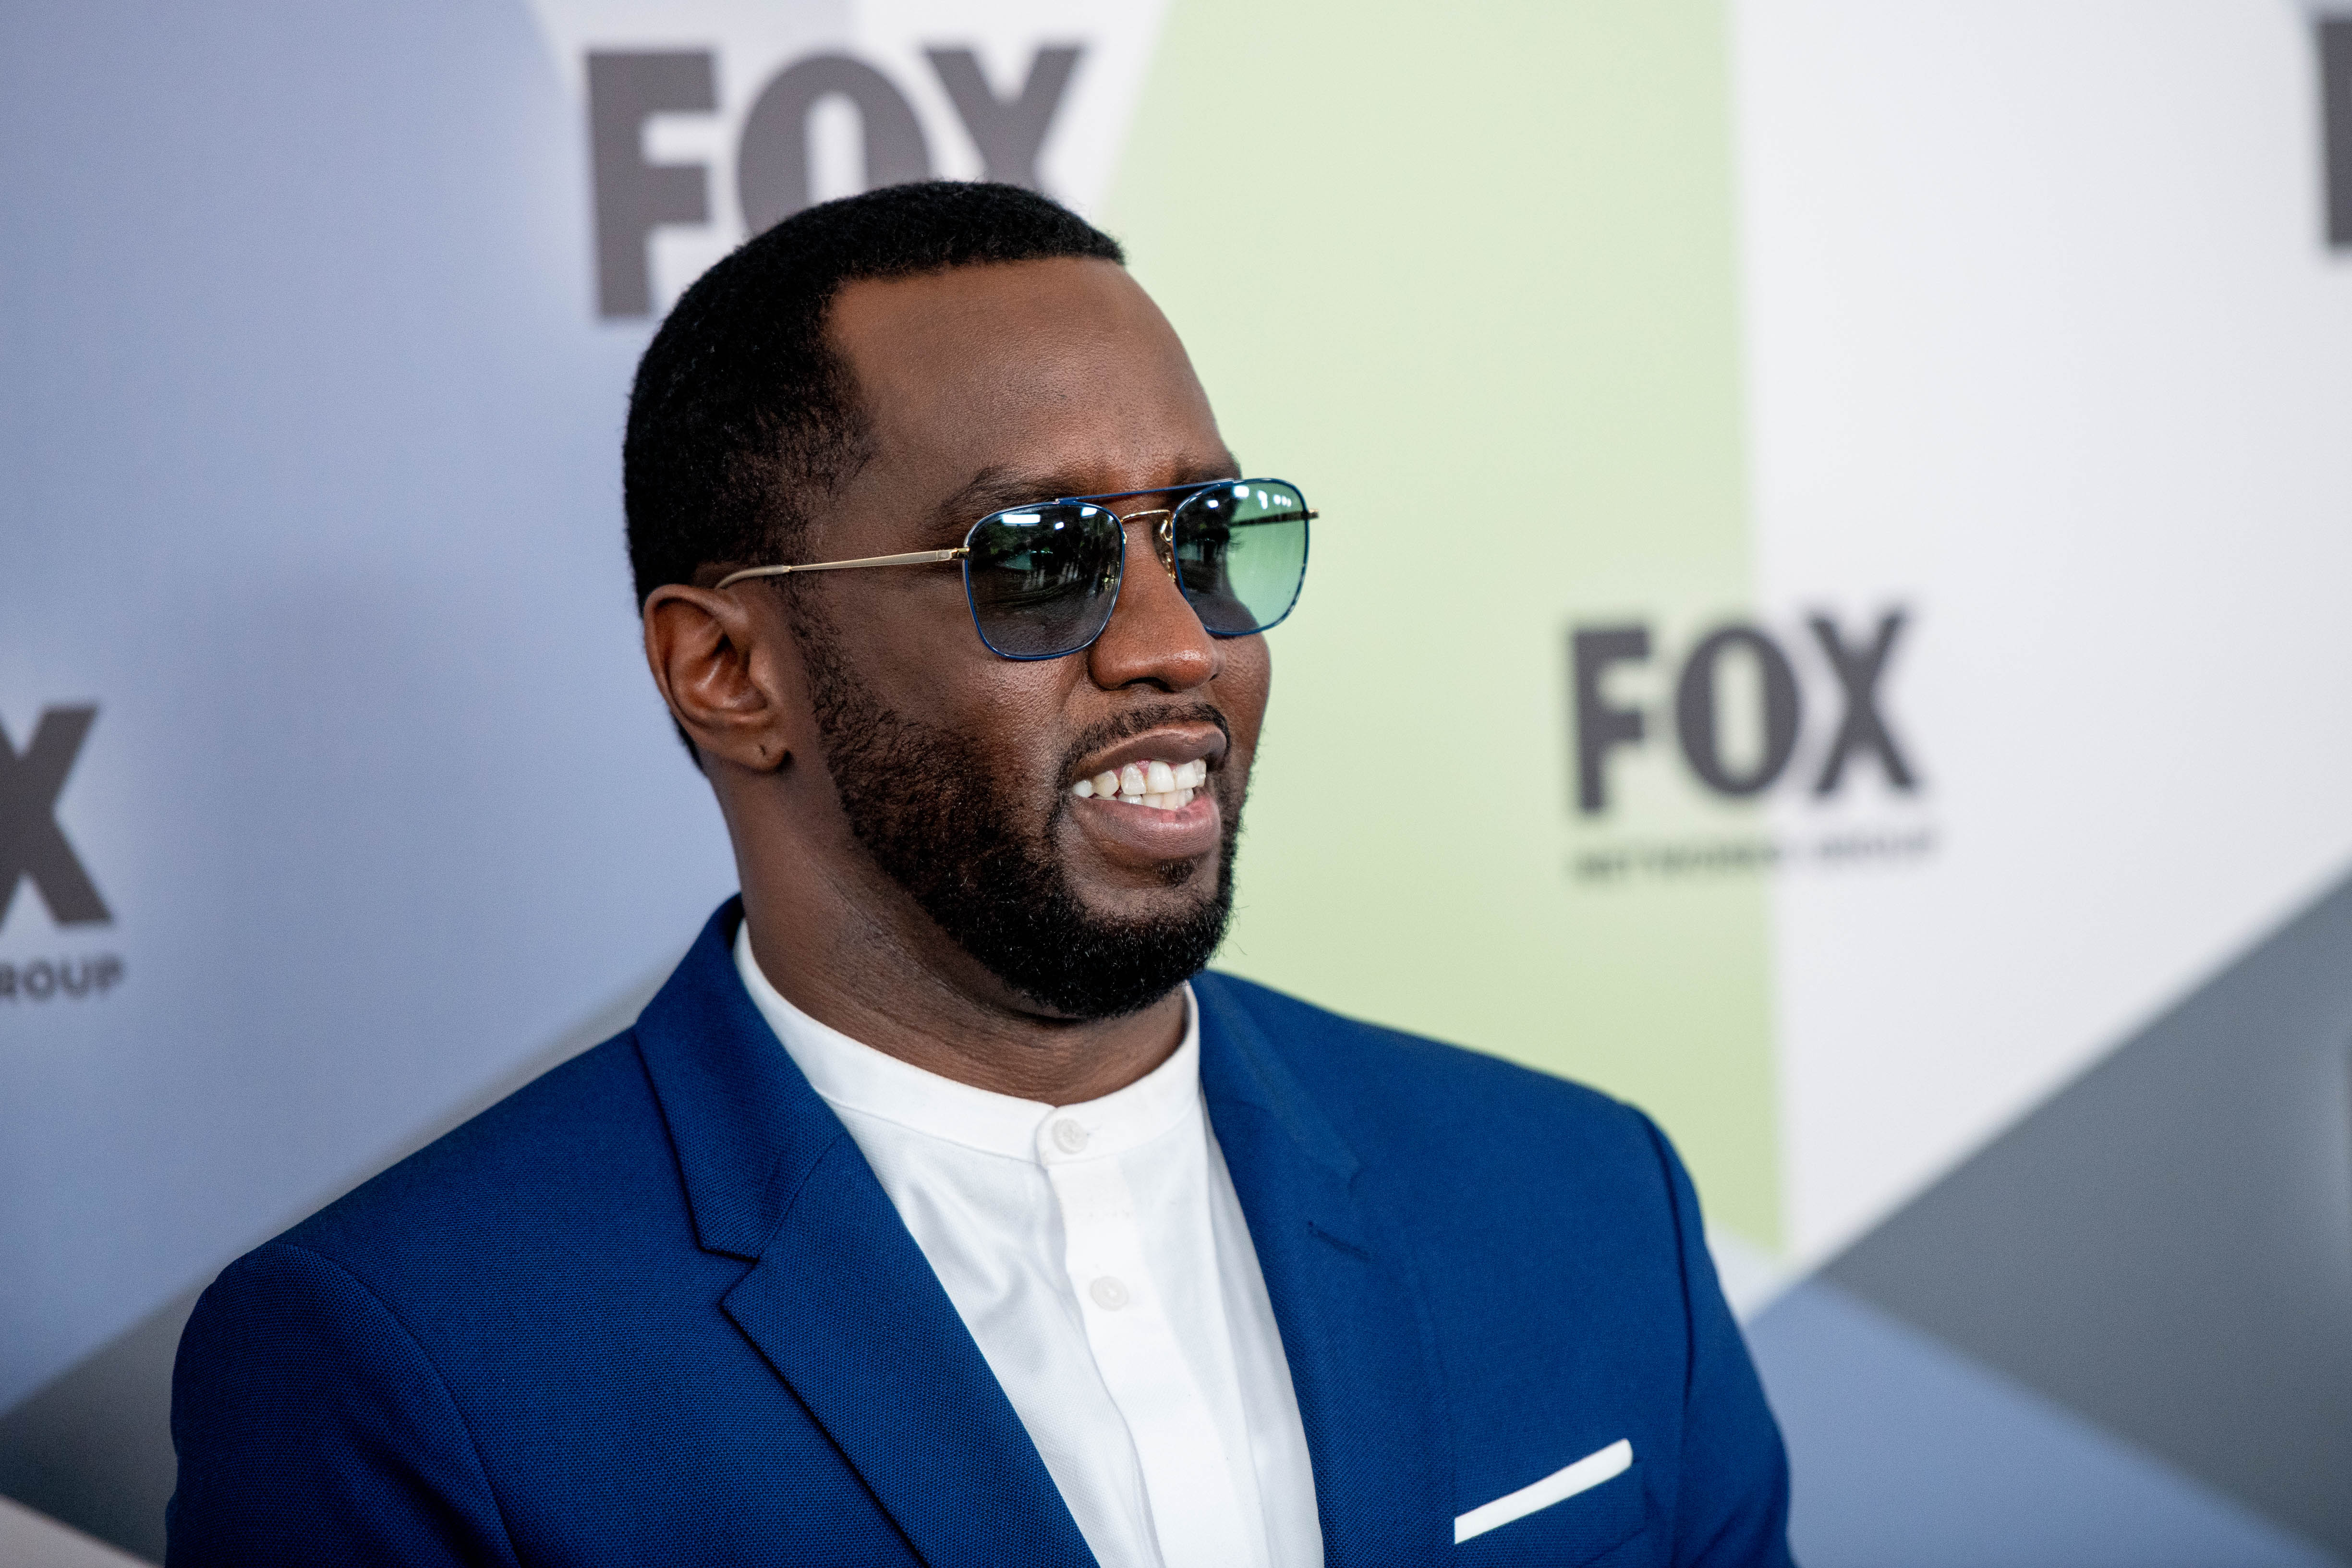 Sean 'Diddy' Combs at he 2018 Fox Network Upfront at Wollman Rink, Central Park on May 14, 2018 in New York City.| Photo: Getty Images